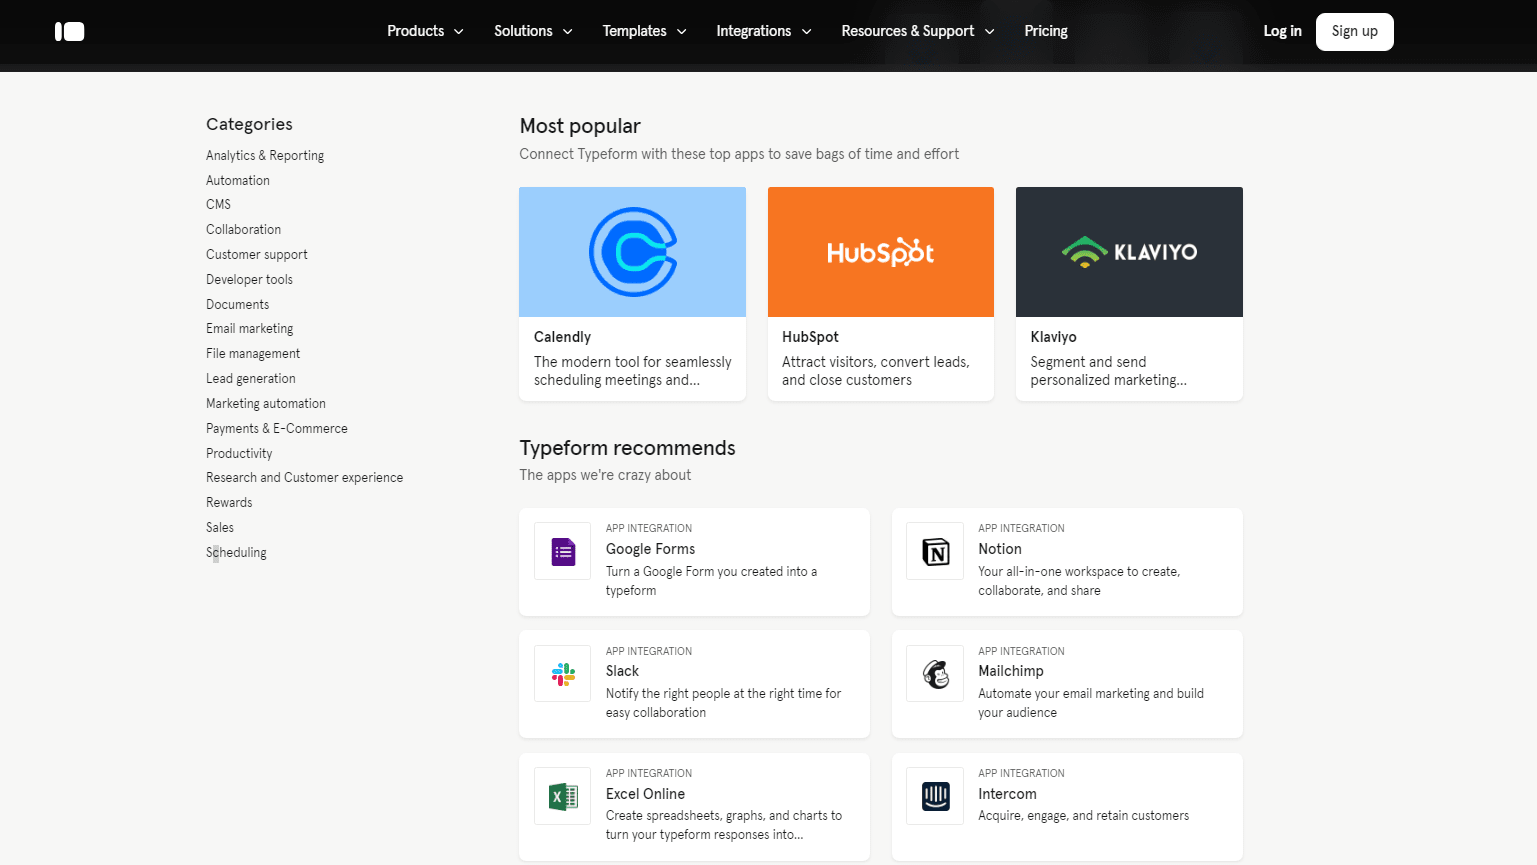 Typeform Connects to Over 120 Different Apps, Including Slack, Mailchimp, and Intercom